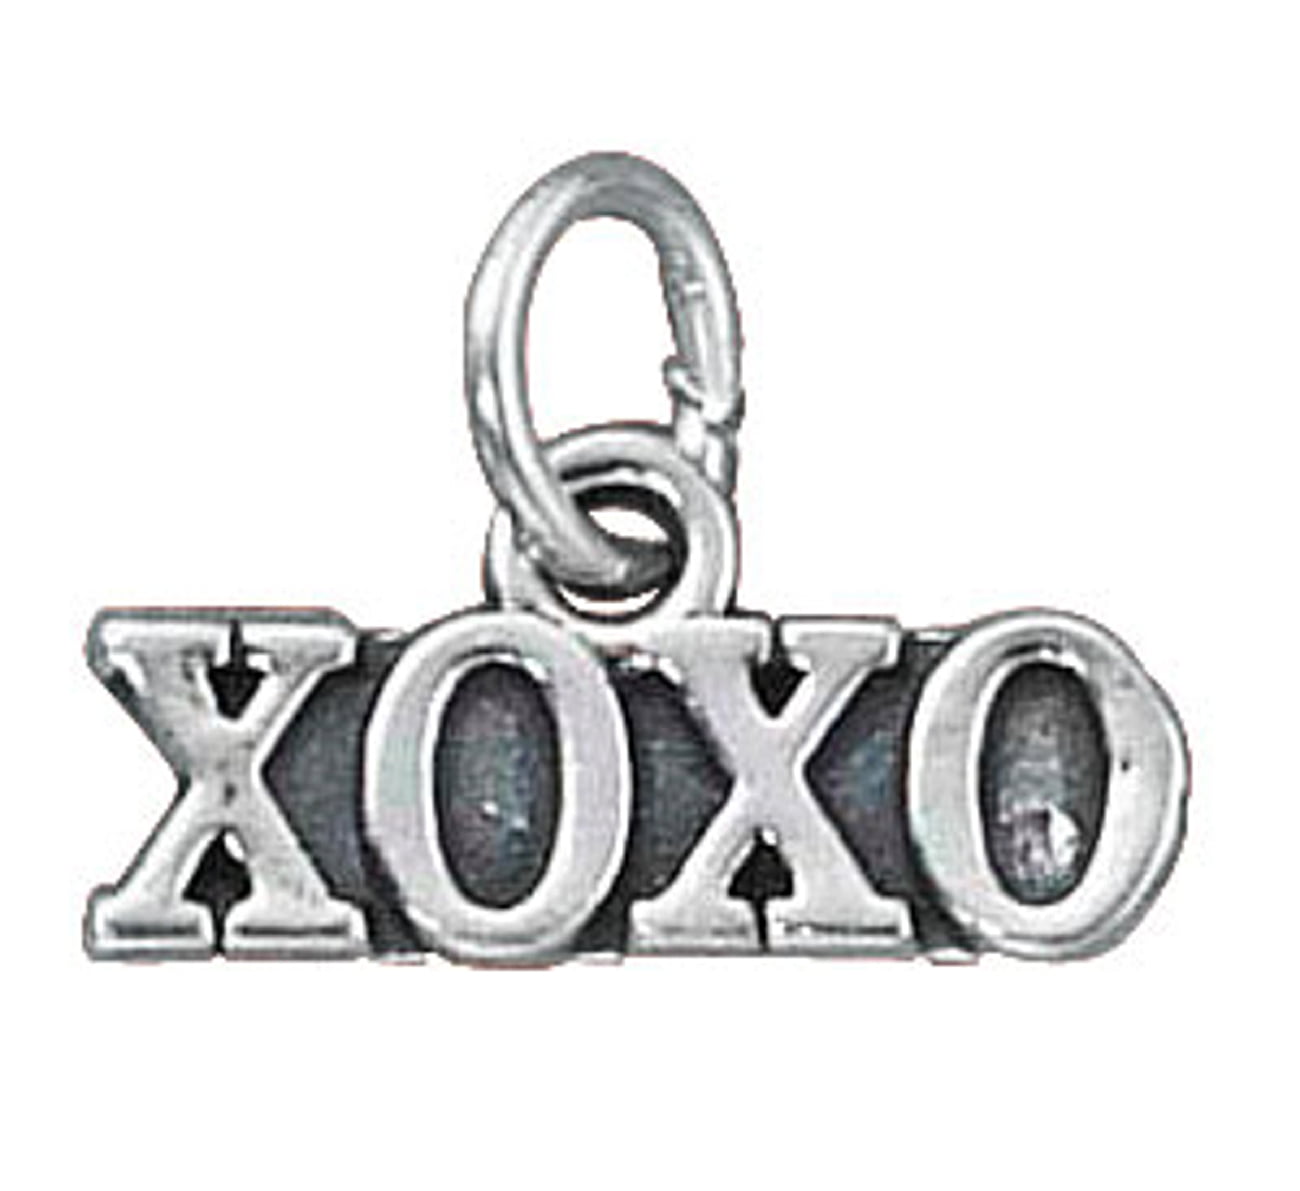 XO necklace 2 sterling silver Cable chain 14 Hugs and kisses Little girls Hugs and Kisses charm necklace in sterling silver on a 14 Little girls jewelry 2 cable chain. 